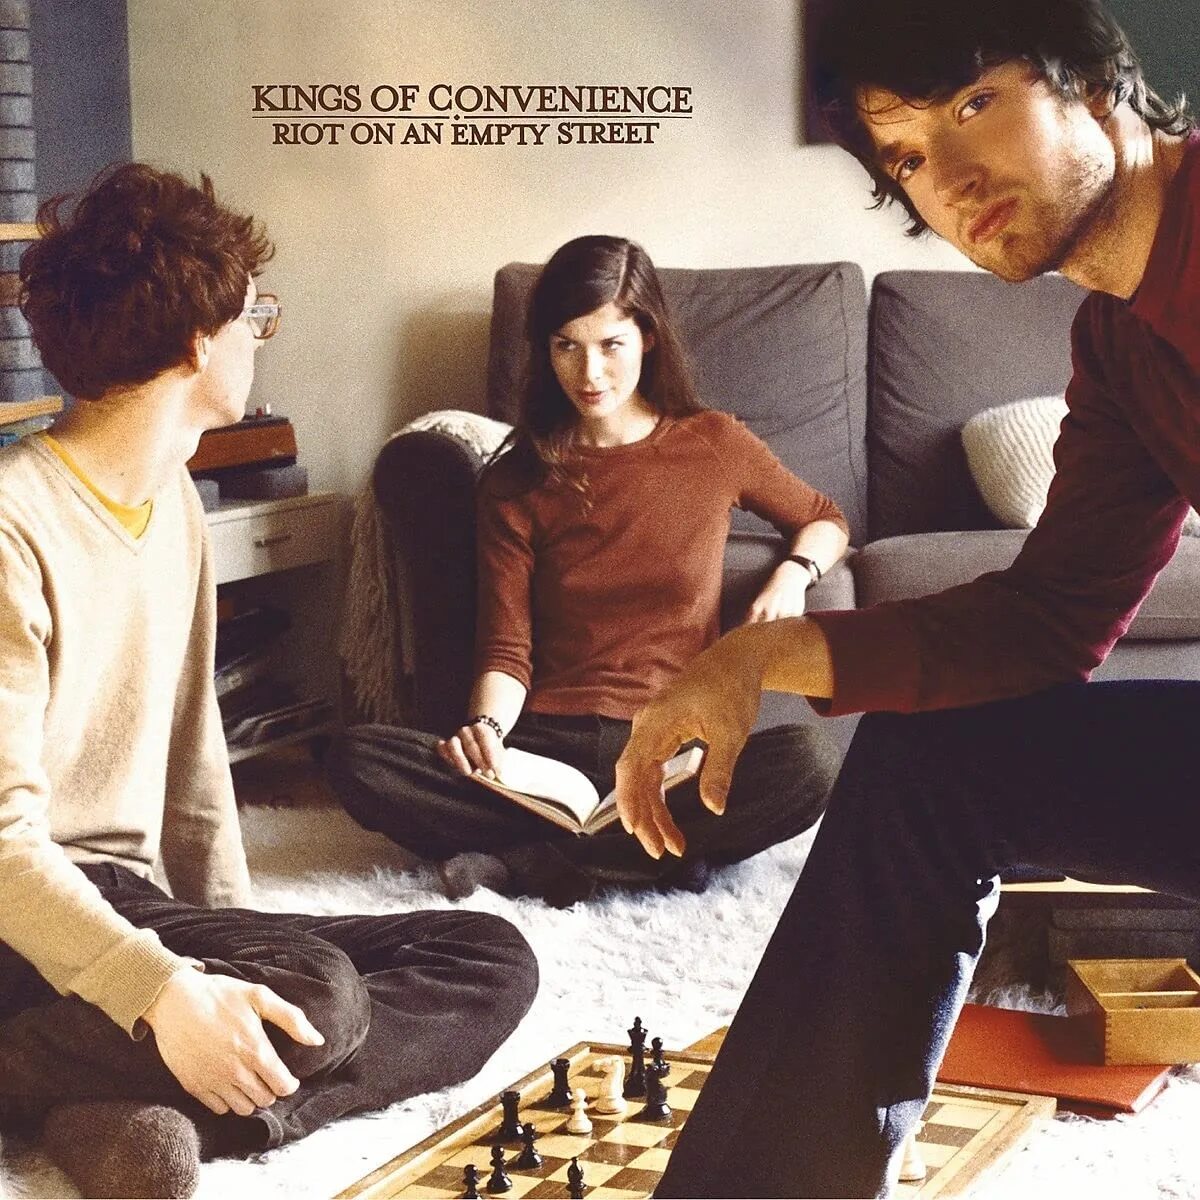 The other way round. Kings of convenience Riot on an empty Street. Группа Kings of convenience. Kings of convenience 2021. Пластинка King of convenience.